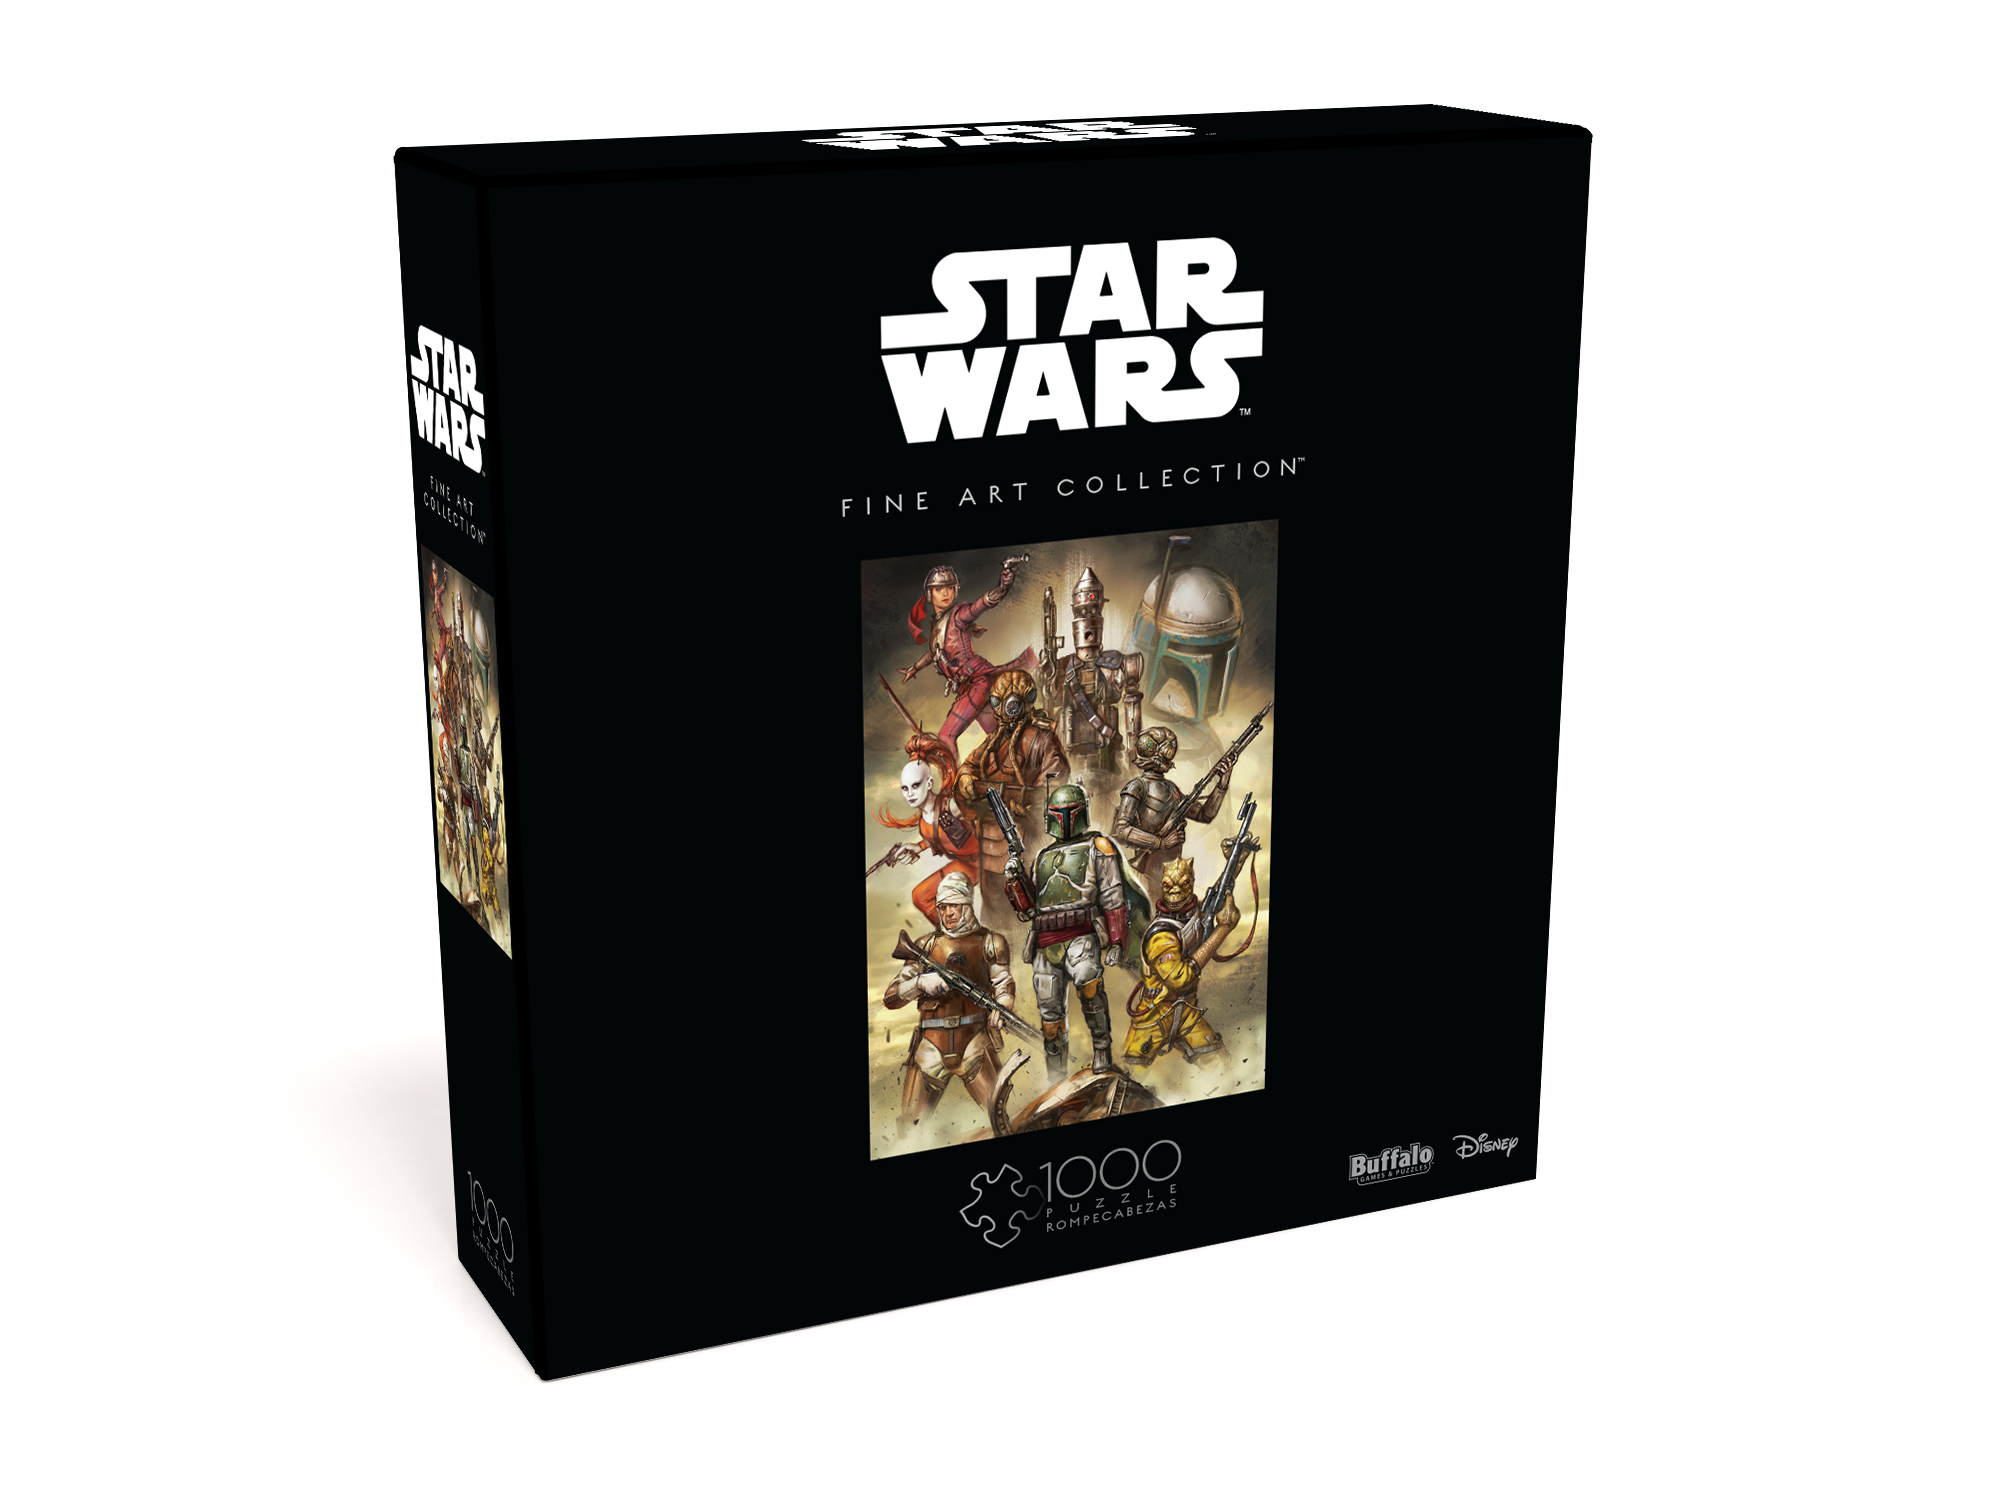 Star Wars 1000 Piece Fine Art Collection Puzzle - image 2 of 5